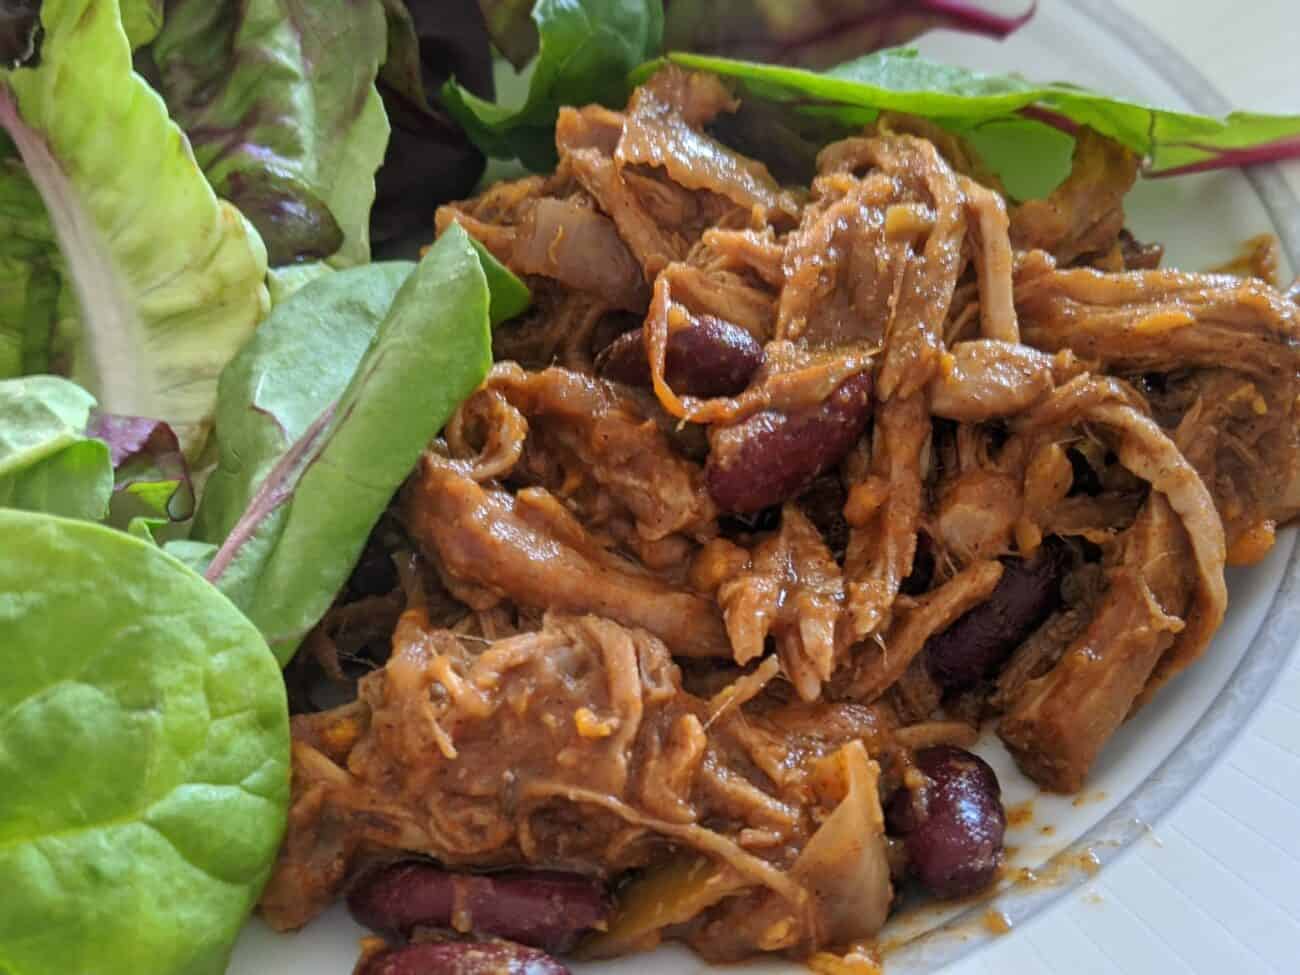 Slow Cooked Pulled Pork ‘n’ Beans